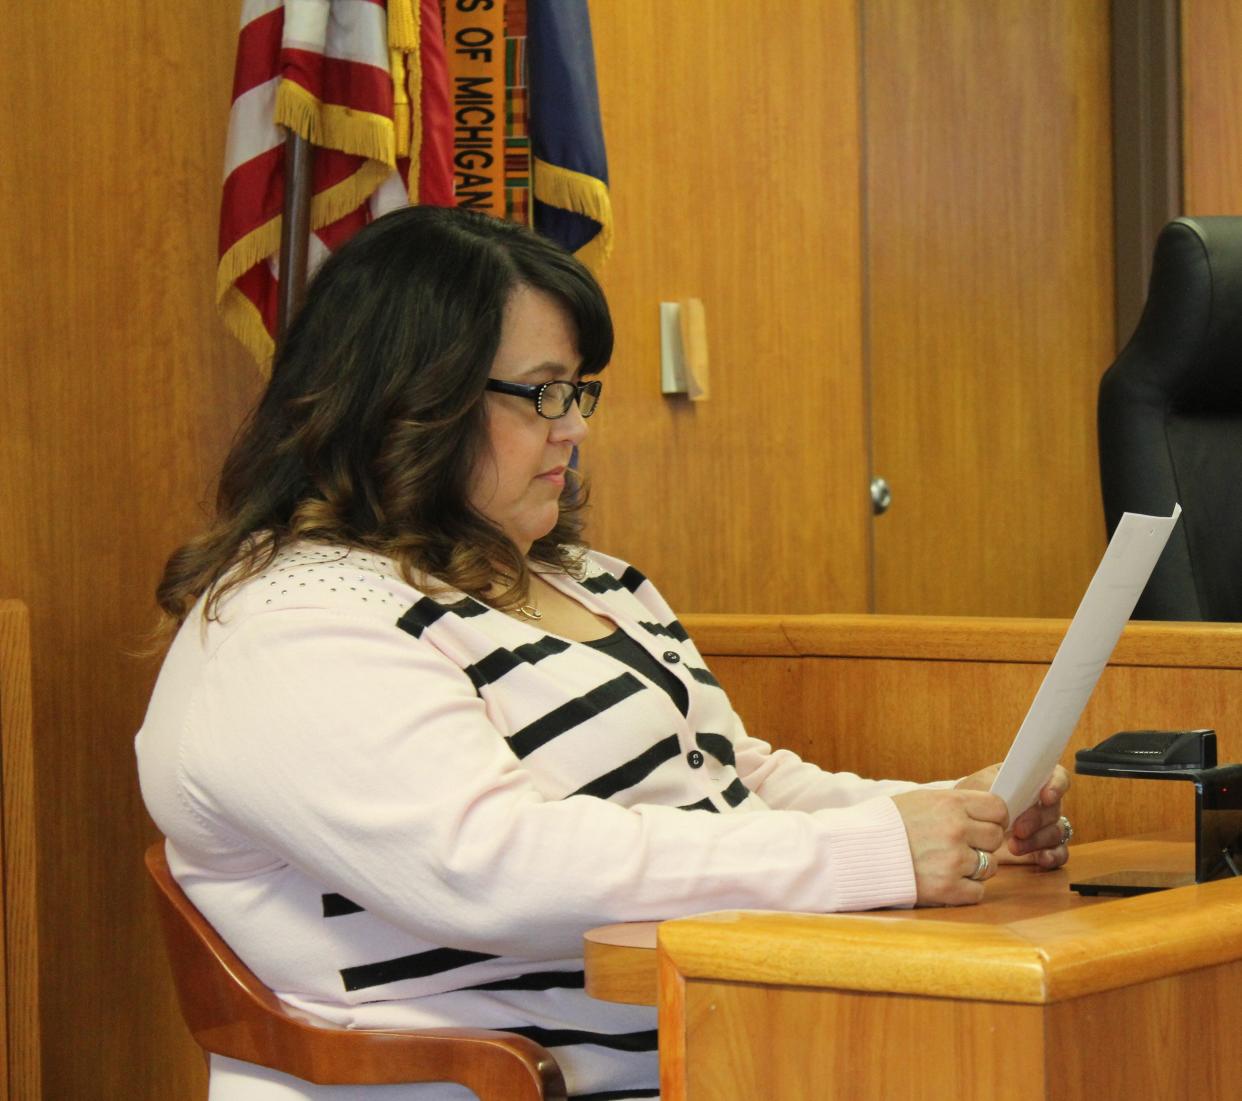 Livingston County GOP Chairperson Jennifer Smith reviews at exhibit in the Washtenaw County 22nd Circuit Court on Tuesday, March 21, 2023.